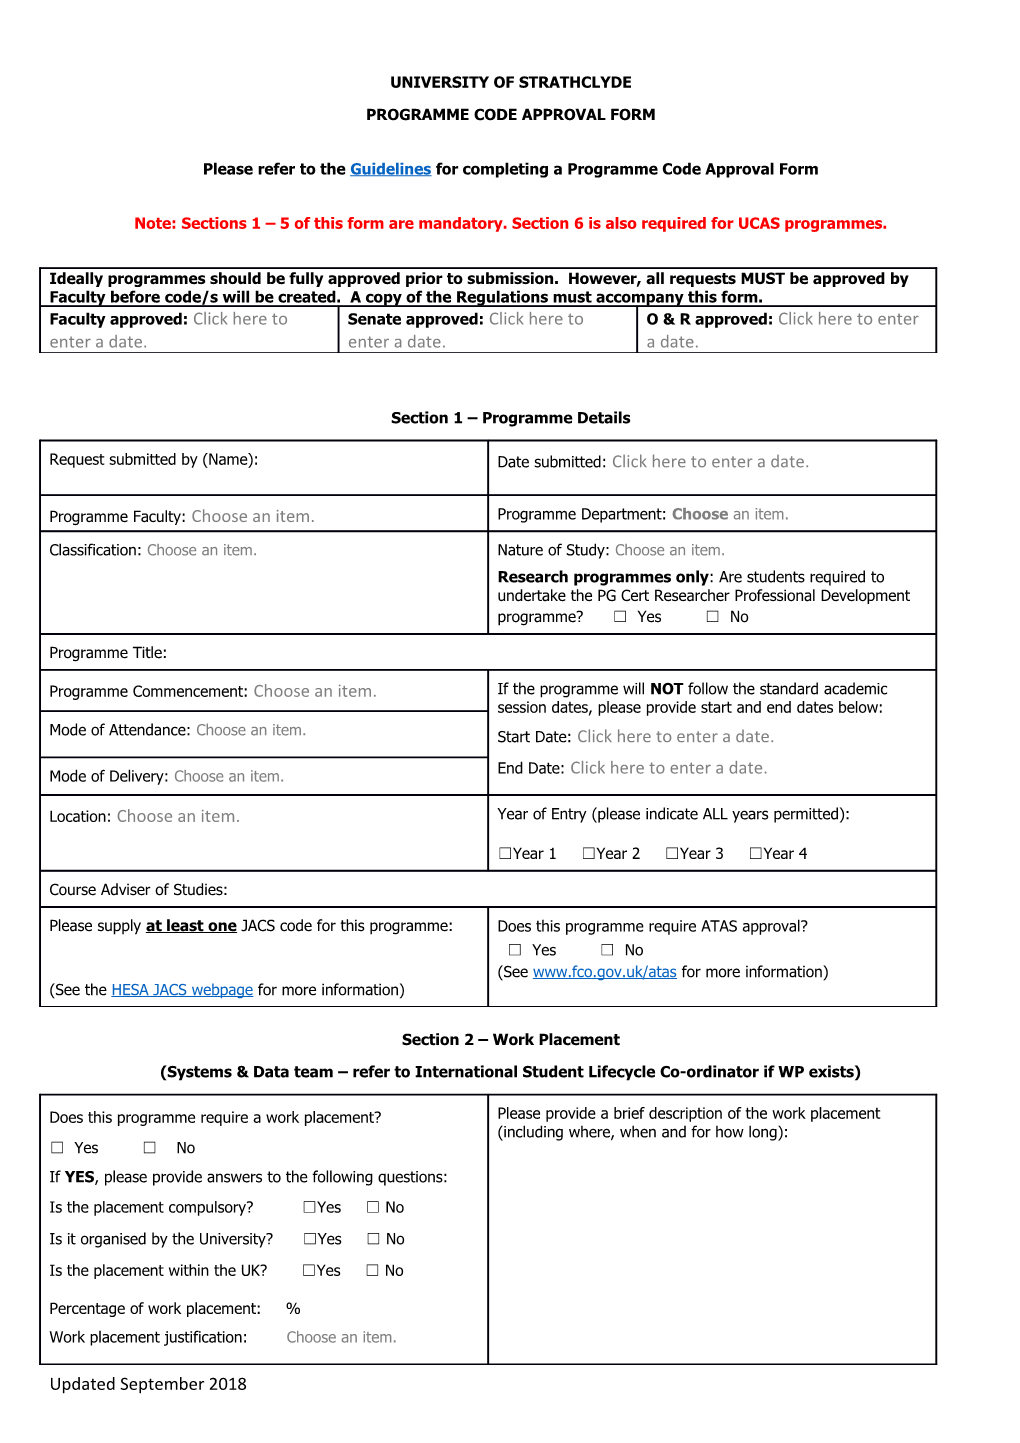 Programme Code Approval Form